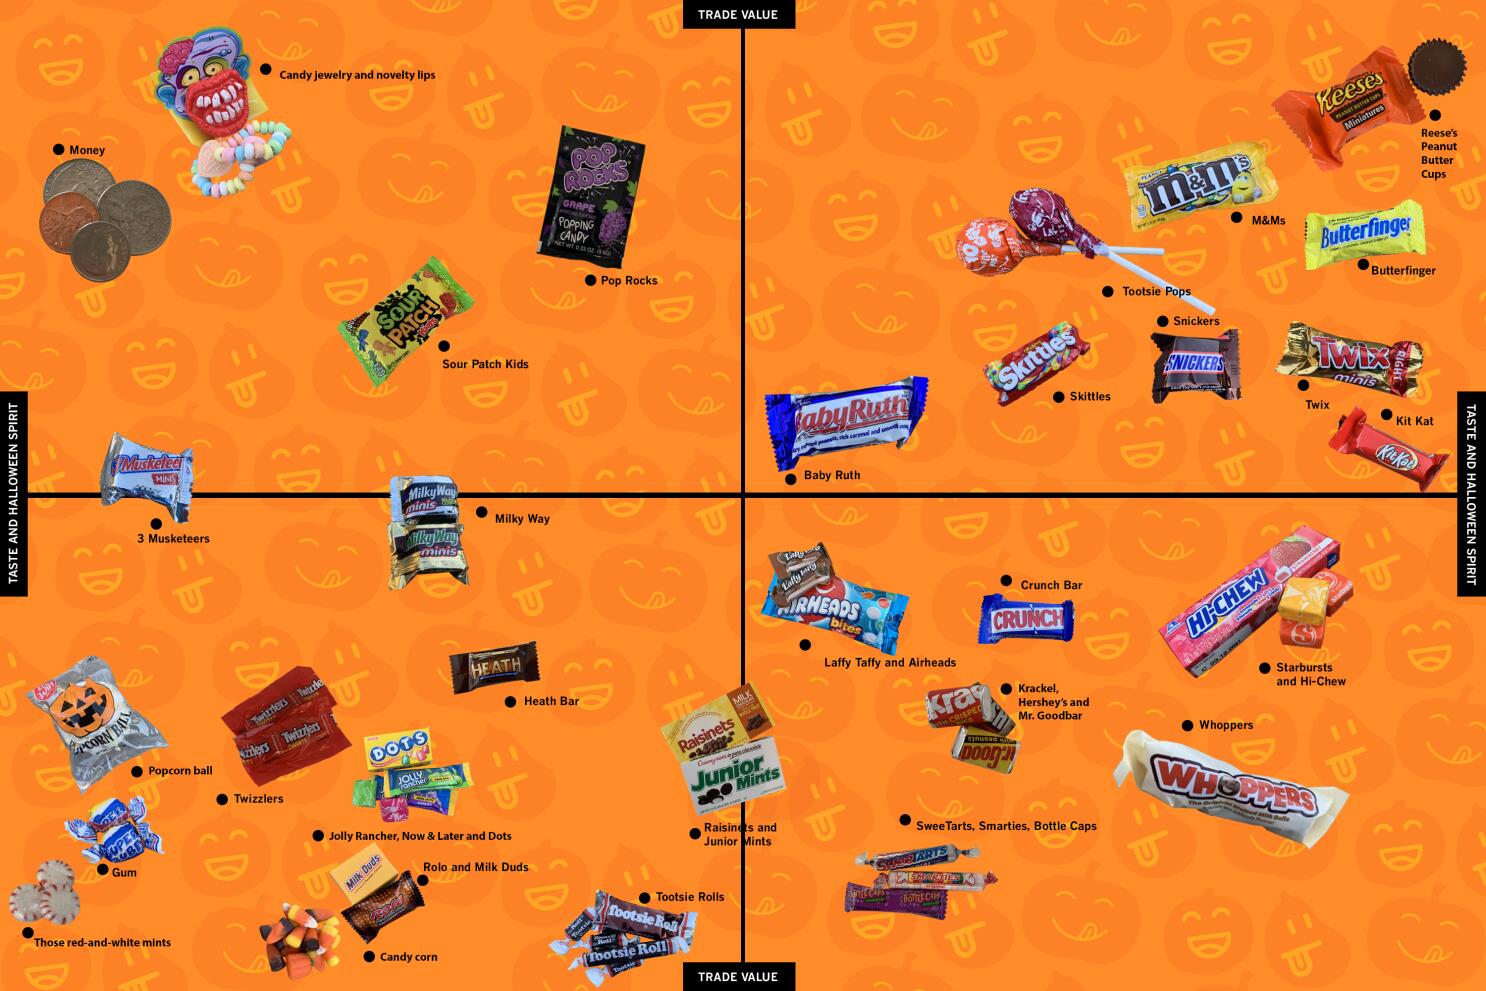 Ranking 25 of the best M&M flavors from worst of the best to best